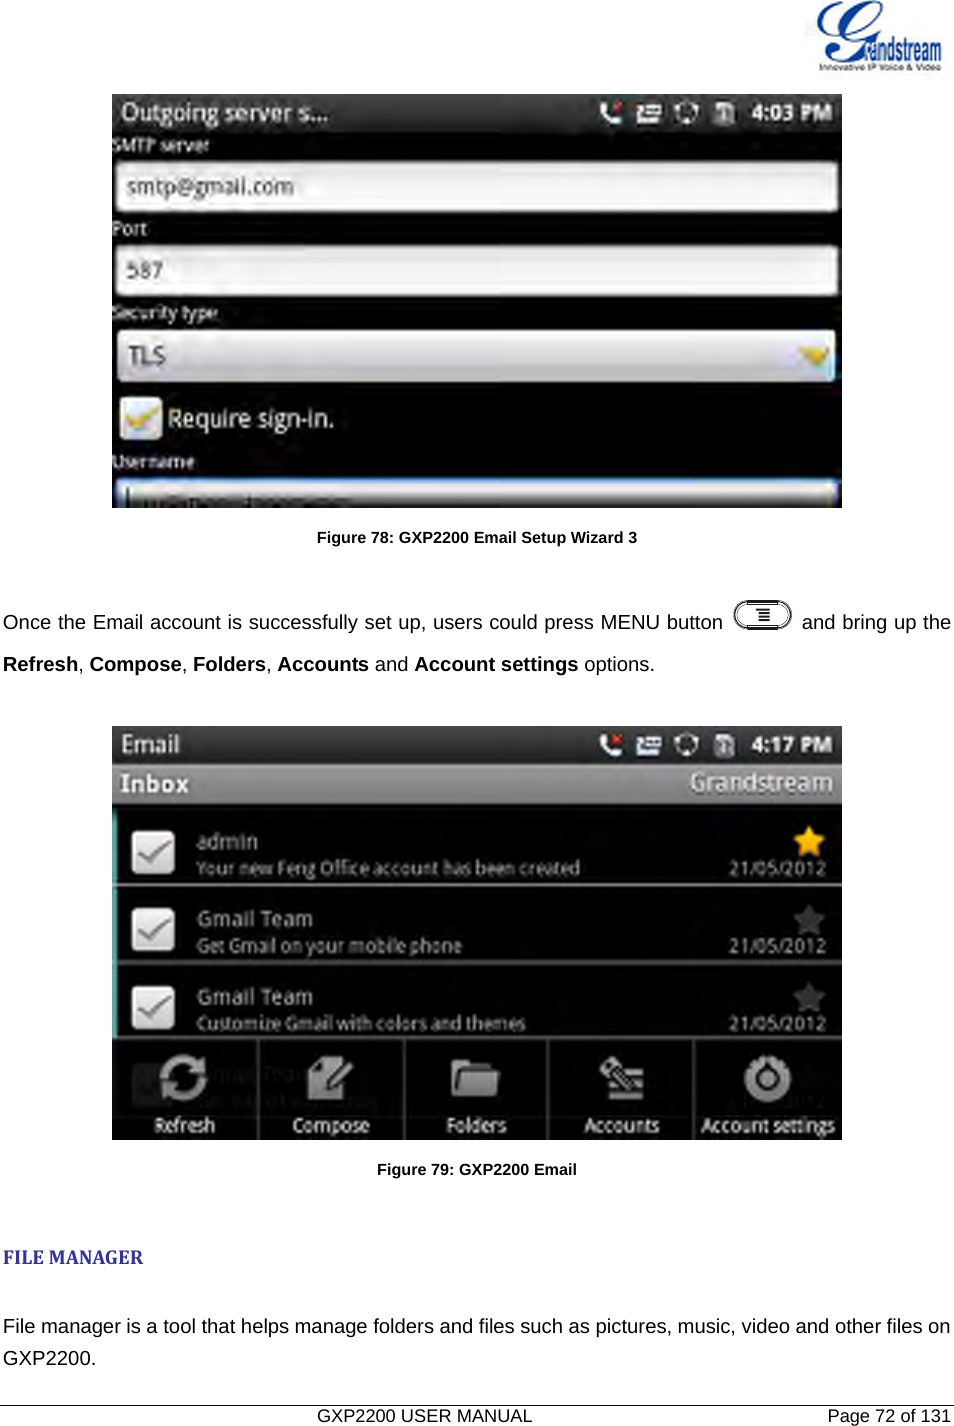   GXP2200 USER MANUAL       Page 72 of 131                                   Figure 78: GXP2200 Email Setup Wizard 3  Once the Email account is successfully set up, users could press MENU button    and bring up the Refresh, Compose, Folders, Accounts and Account settings options.     Figure 79: GXP2200 Email  FILEMANAGERFile manageris a tool that helps manage folders and files such as pictures, music, video and other files on GXP2200. 